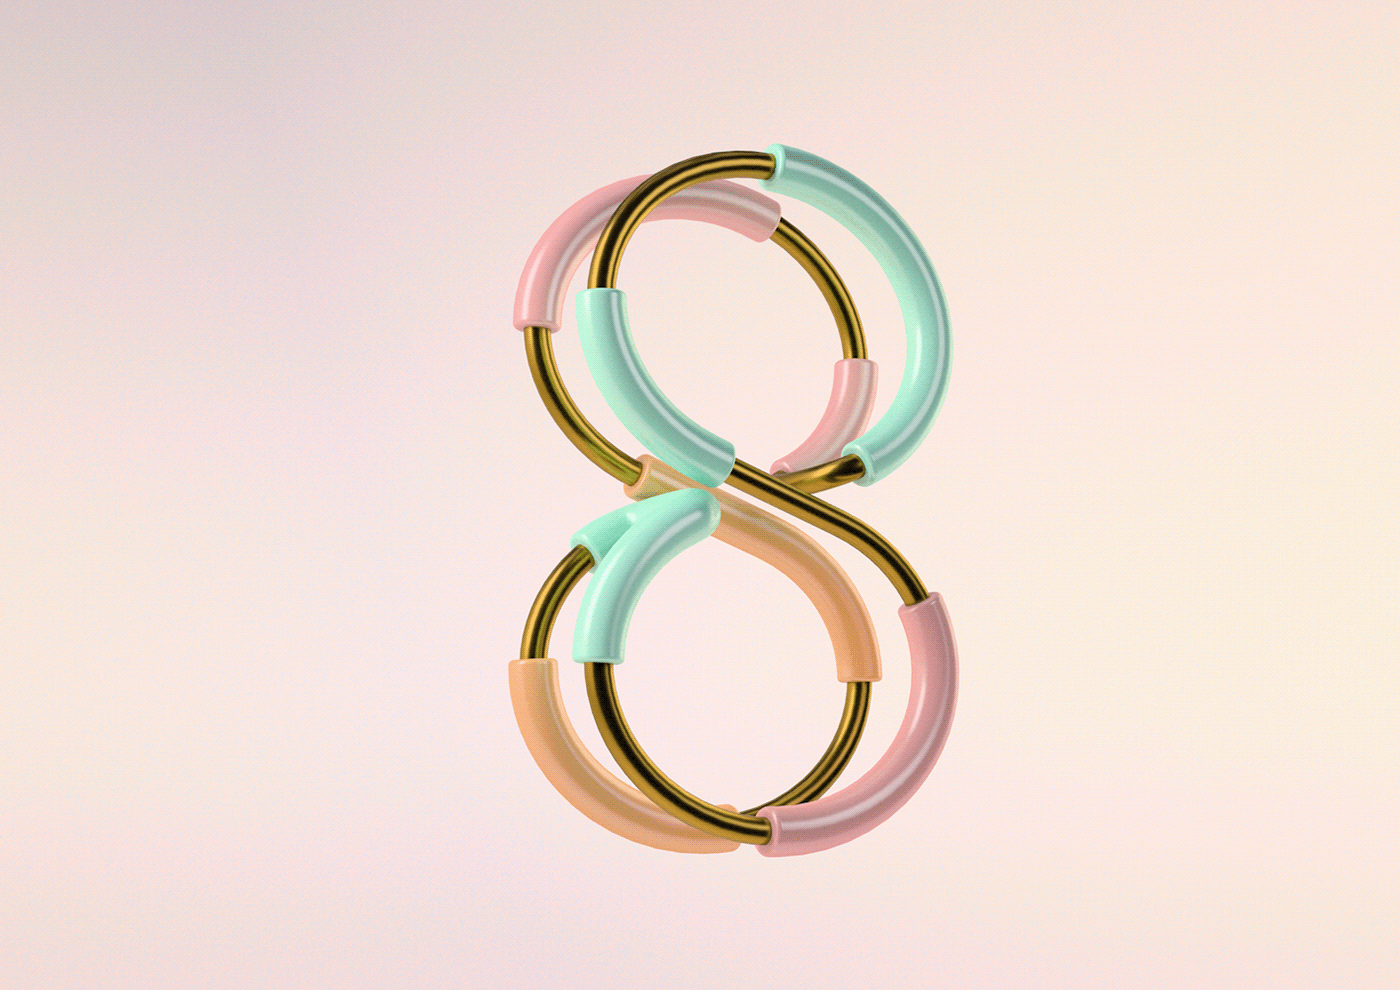 36days 36daysoftype 3D 3DType alphabets colors letters octane type typography  